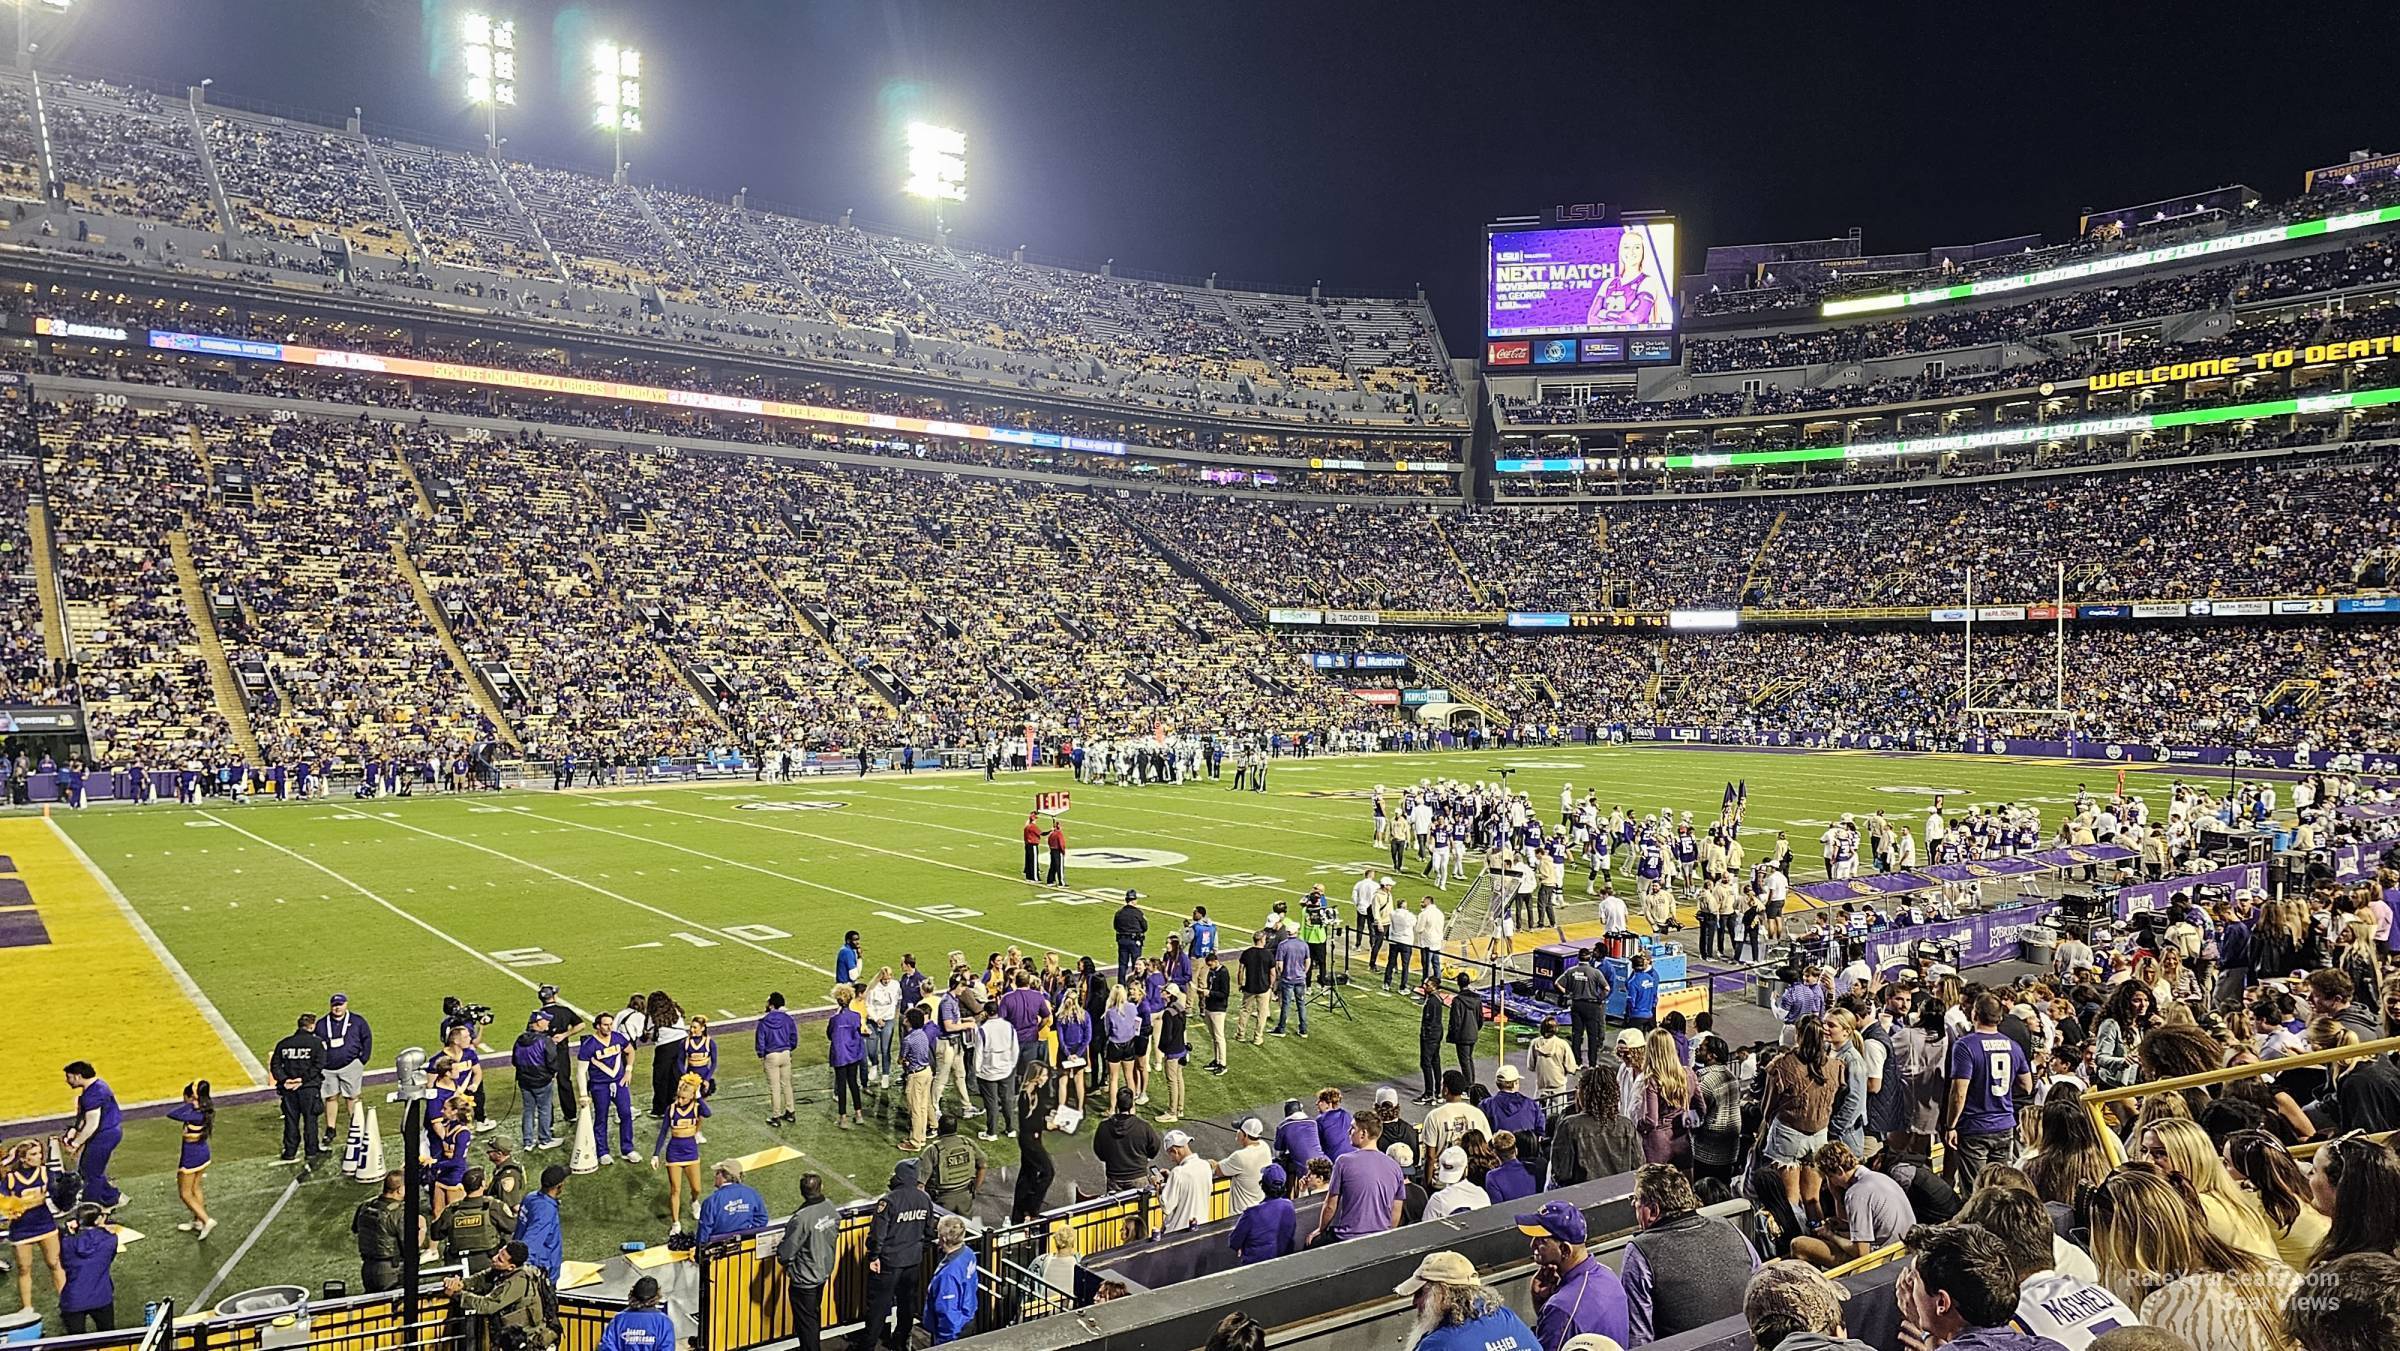 section 221, row 1 seat view  - tiger stadium